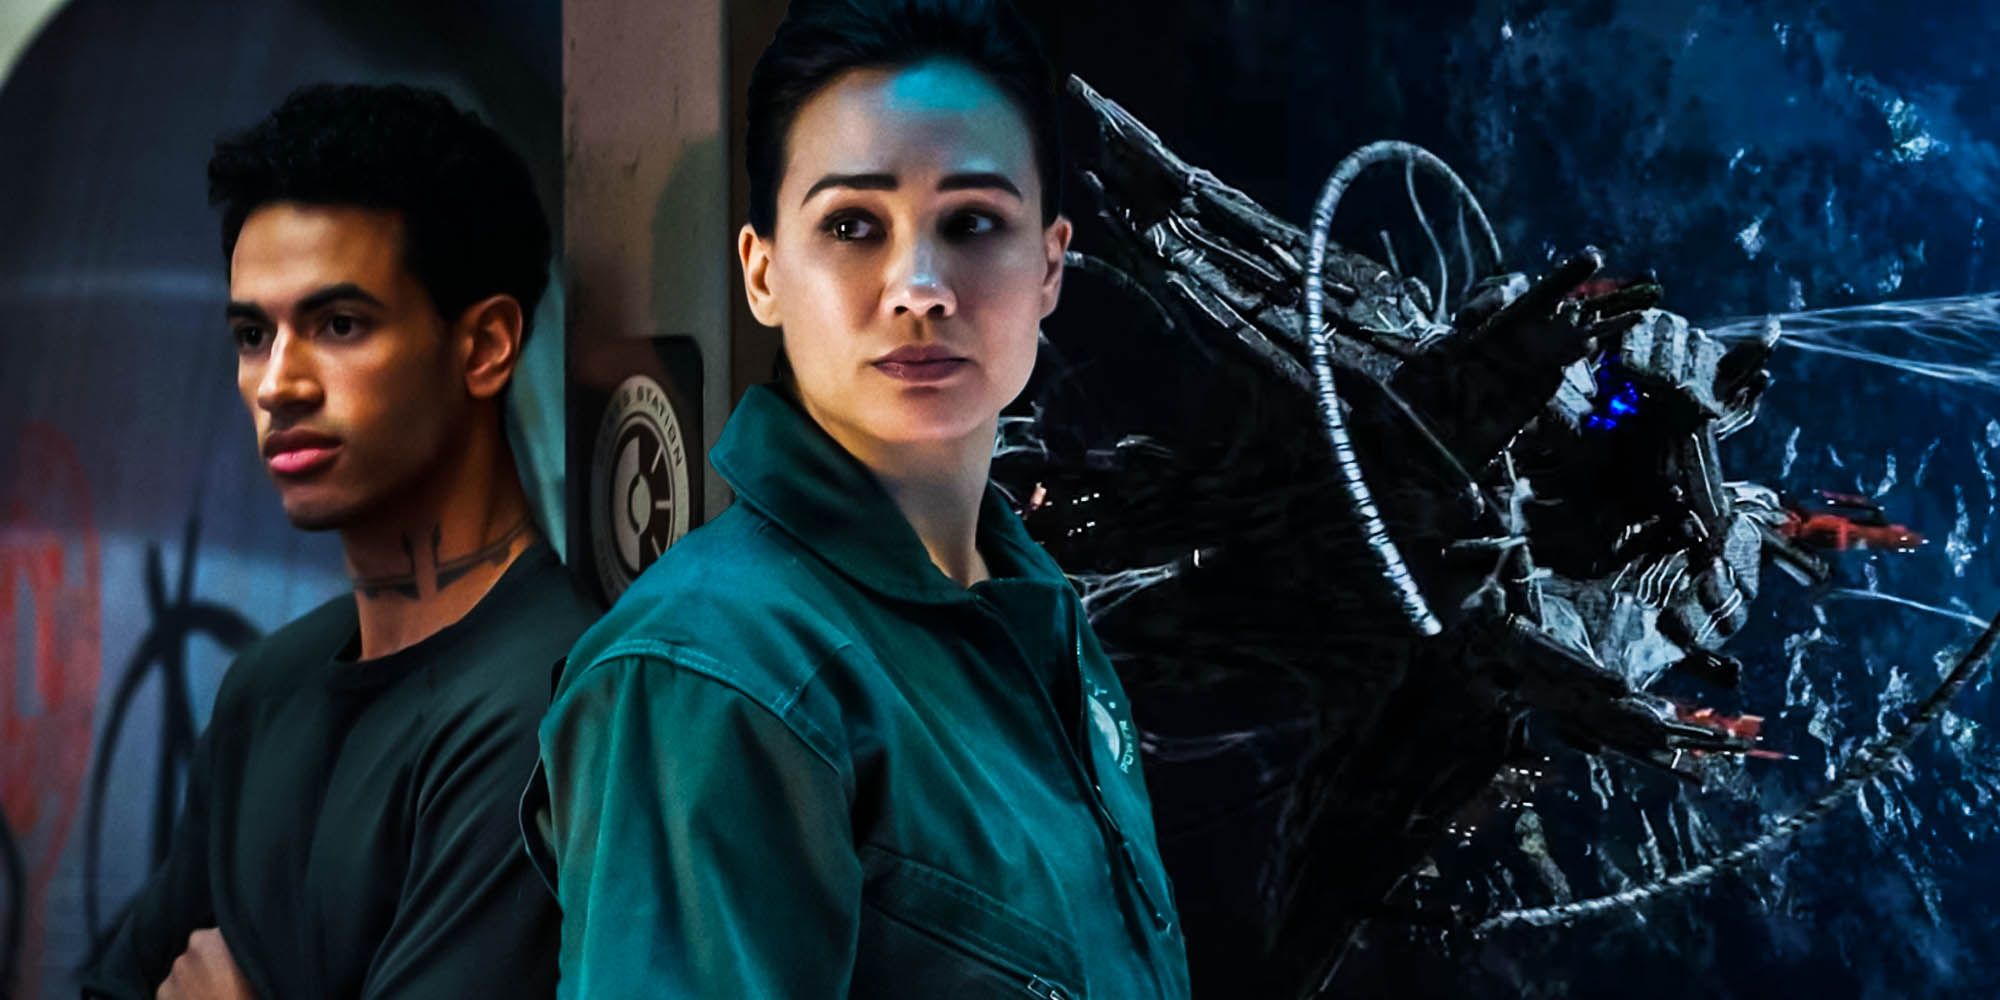 the Expanse biggest unanswered questions after the finale clarissa filip laconia